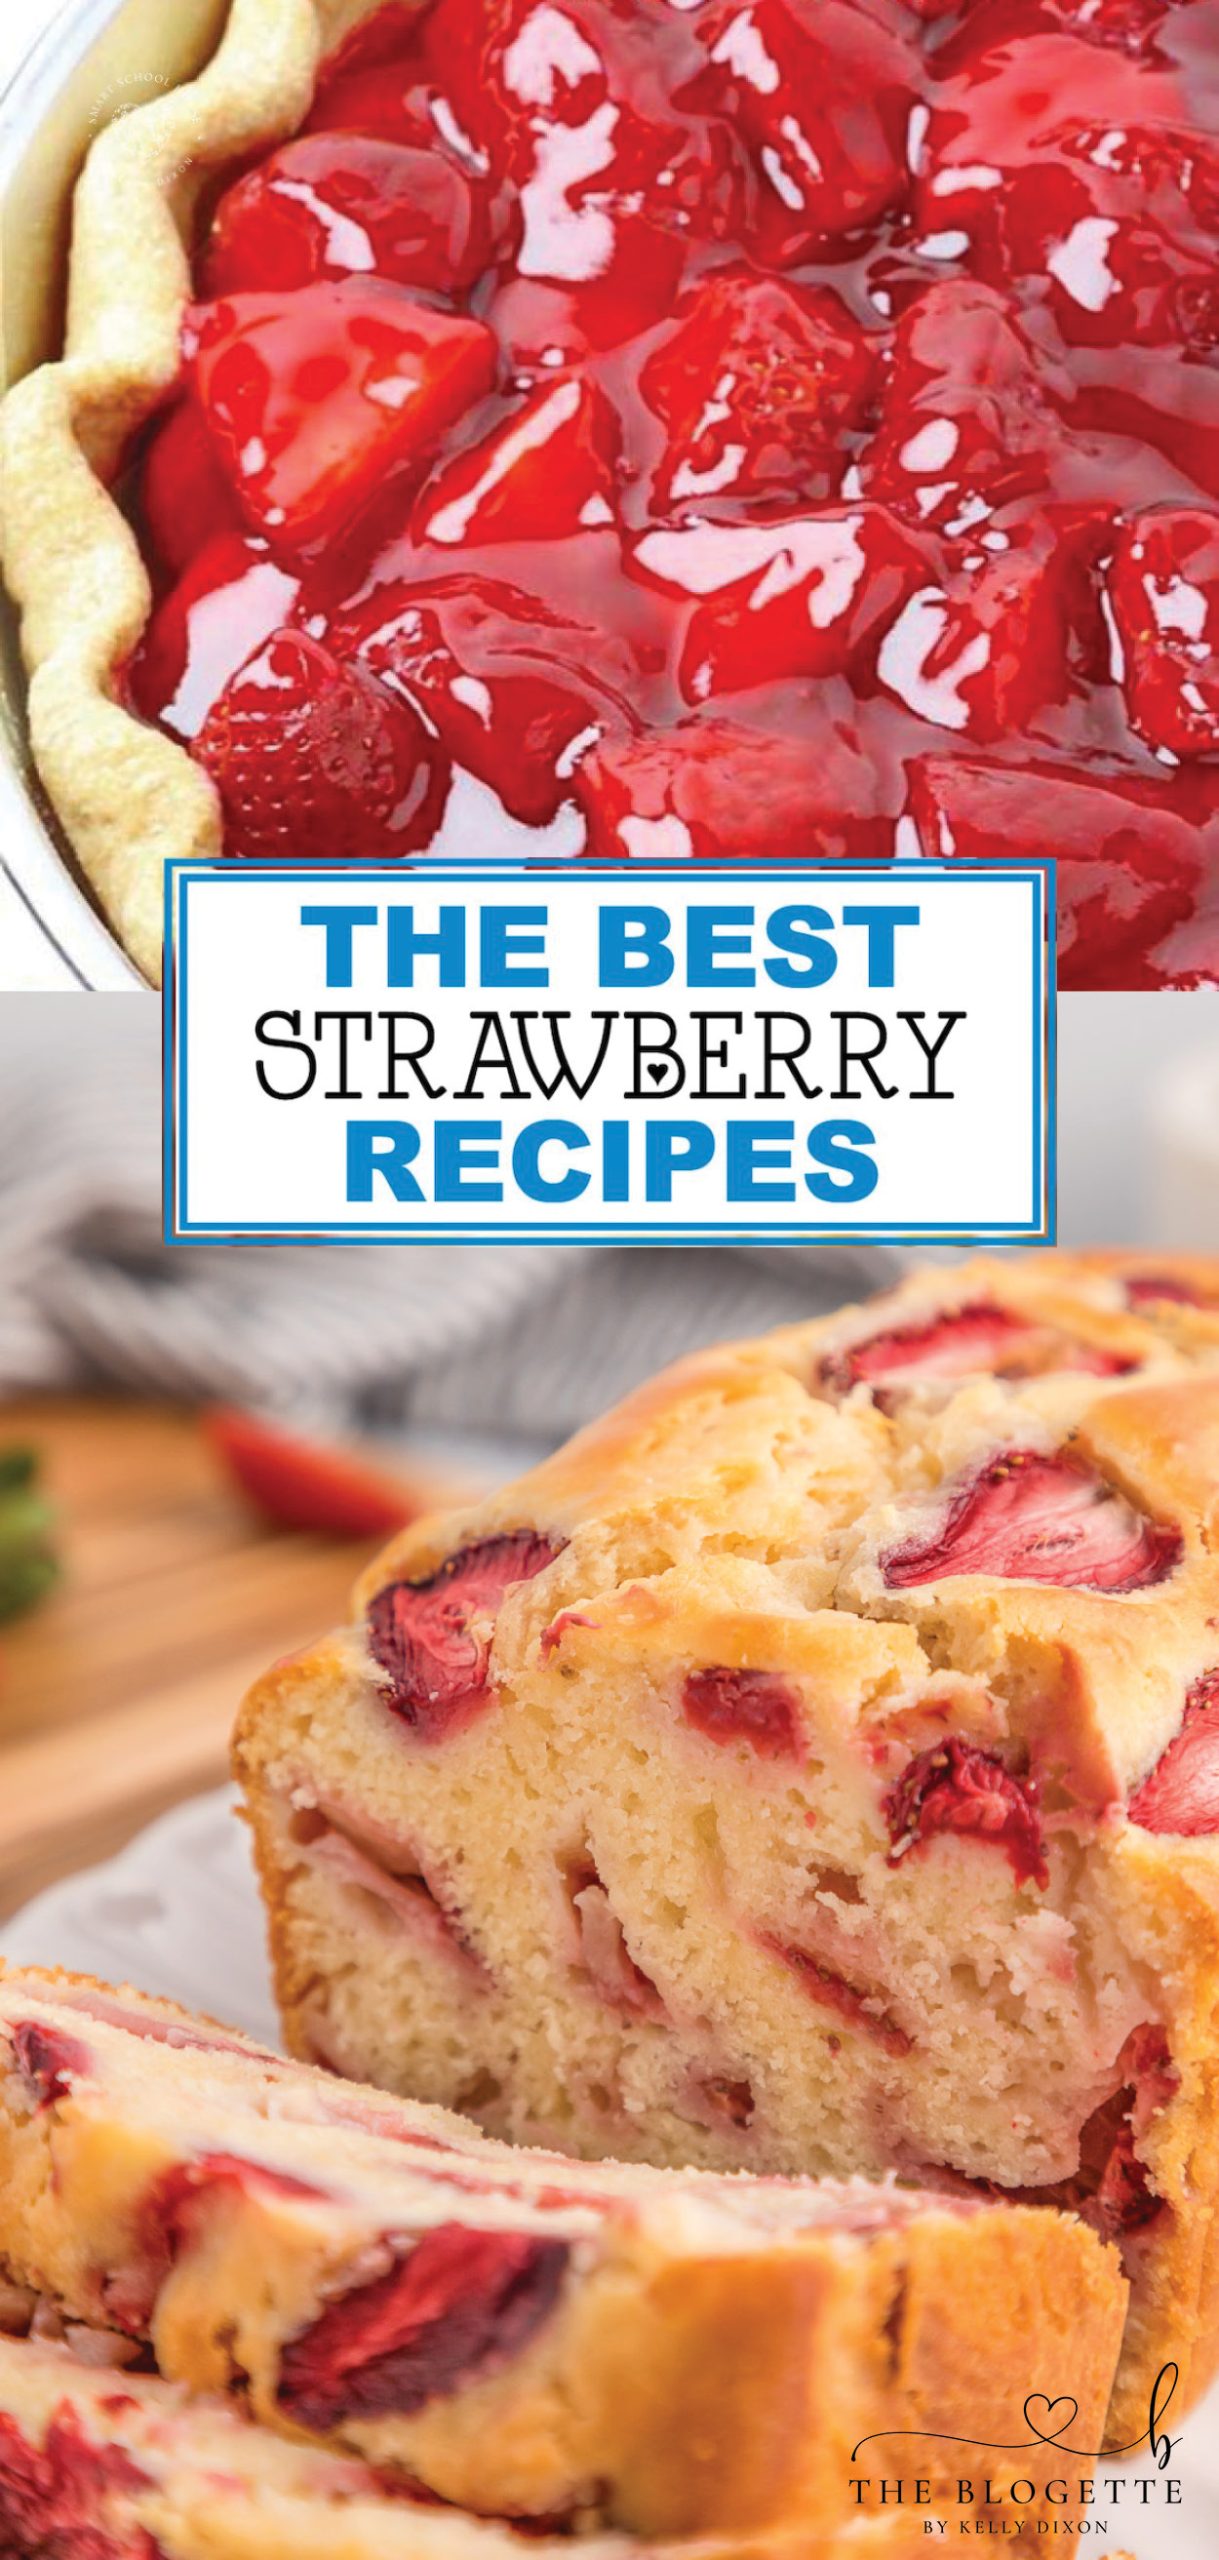 The BEST Strawberry Recipes!